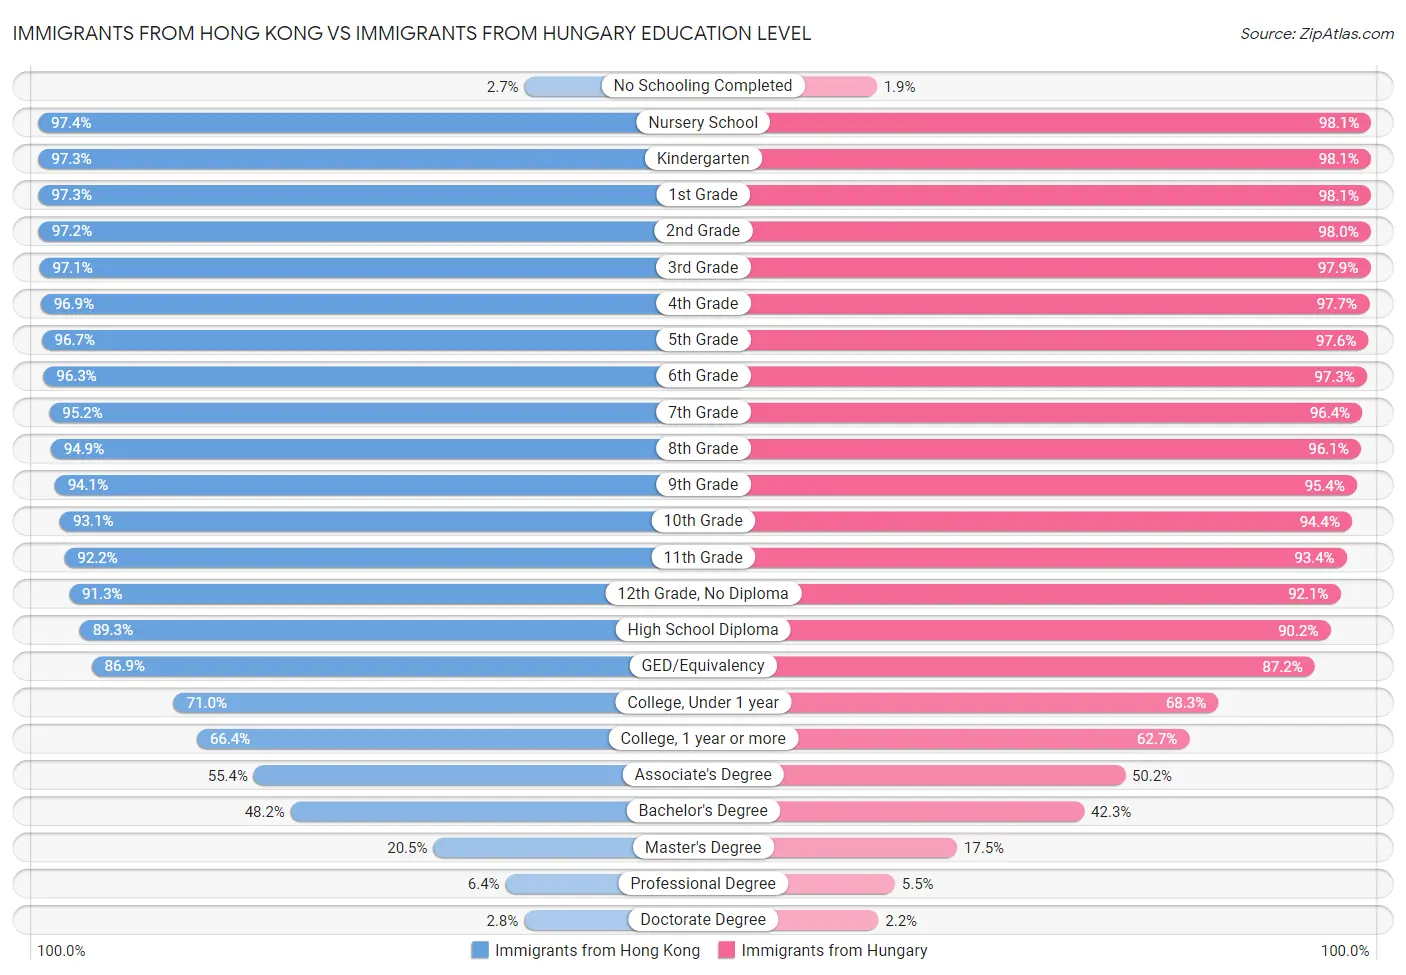 Immigrants from Hong Kong vs Immigrants from Hungary Education Level